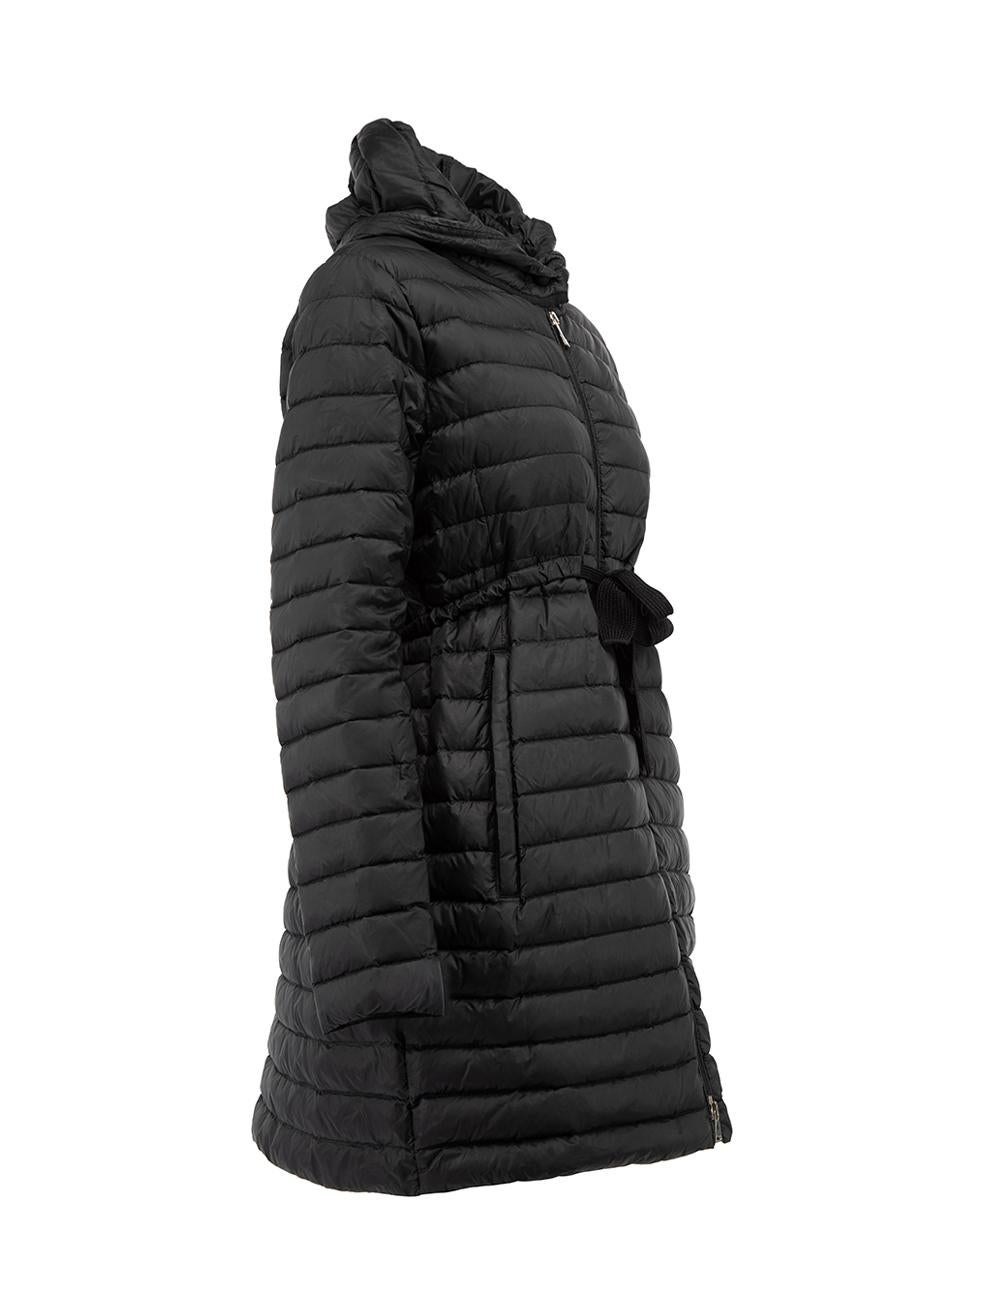 CONDITION is Very good. Minimal wear to coat is evident. Minimal wear/marks seen to the outer nylon fabric, the drawstring and interior of hood on this used Moncler designer resale item Details Black Polyamide Goose down Figure hugging Belted waist